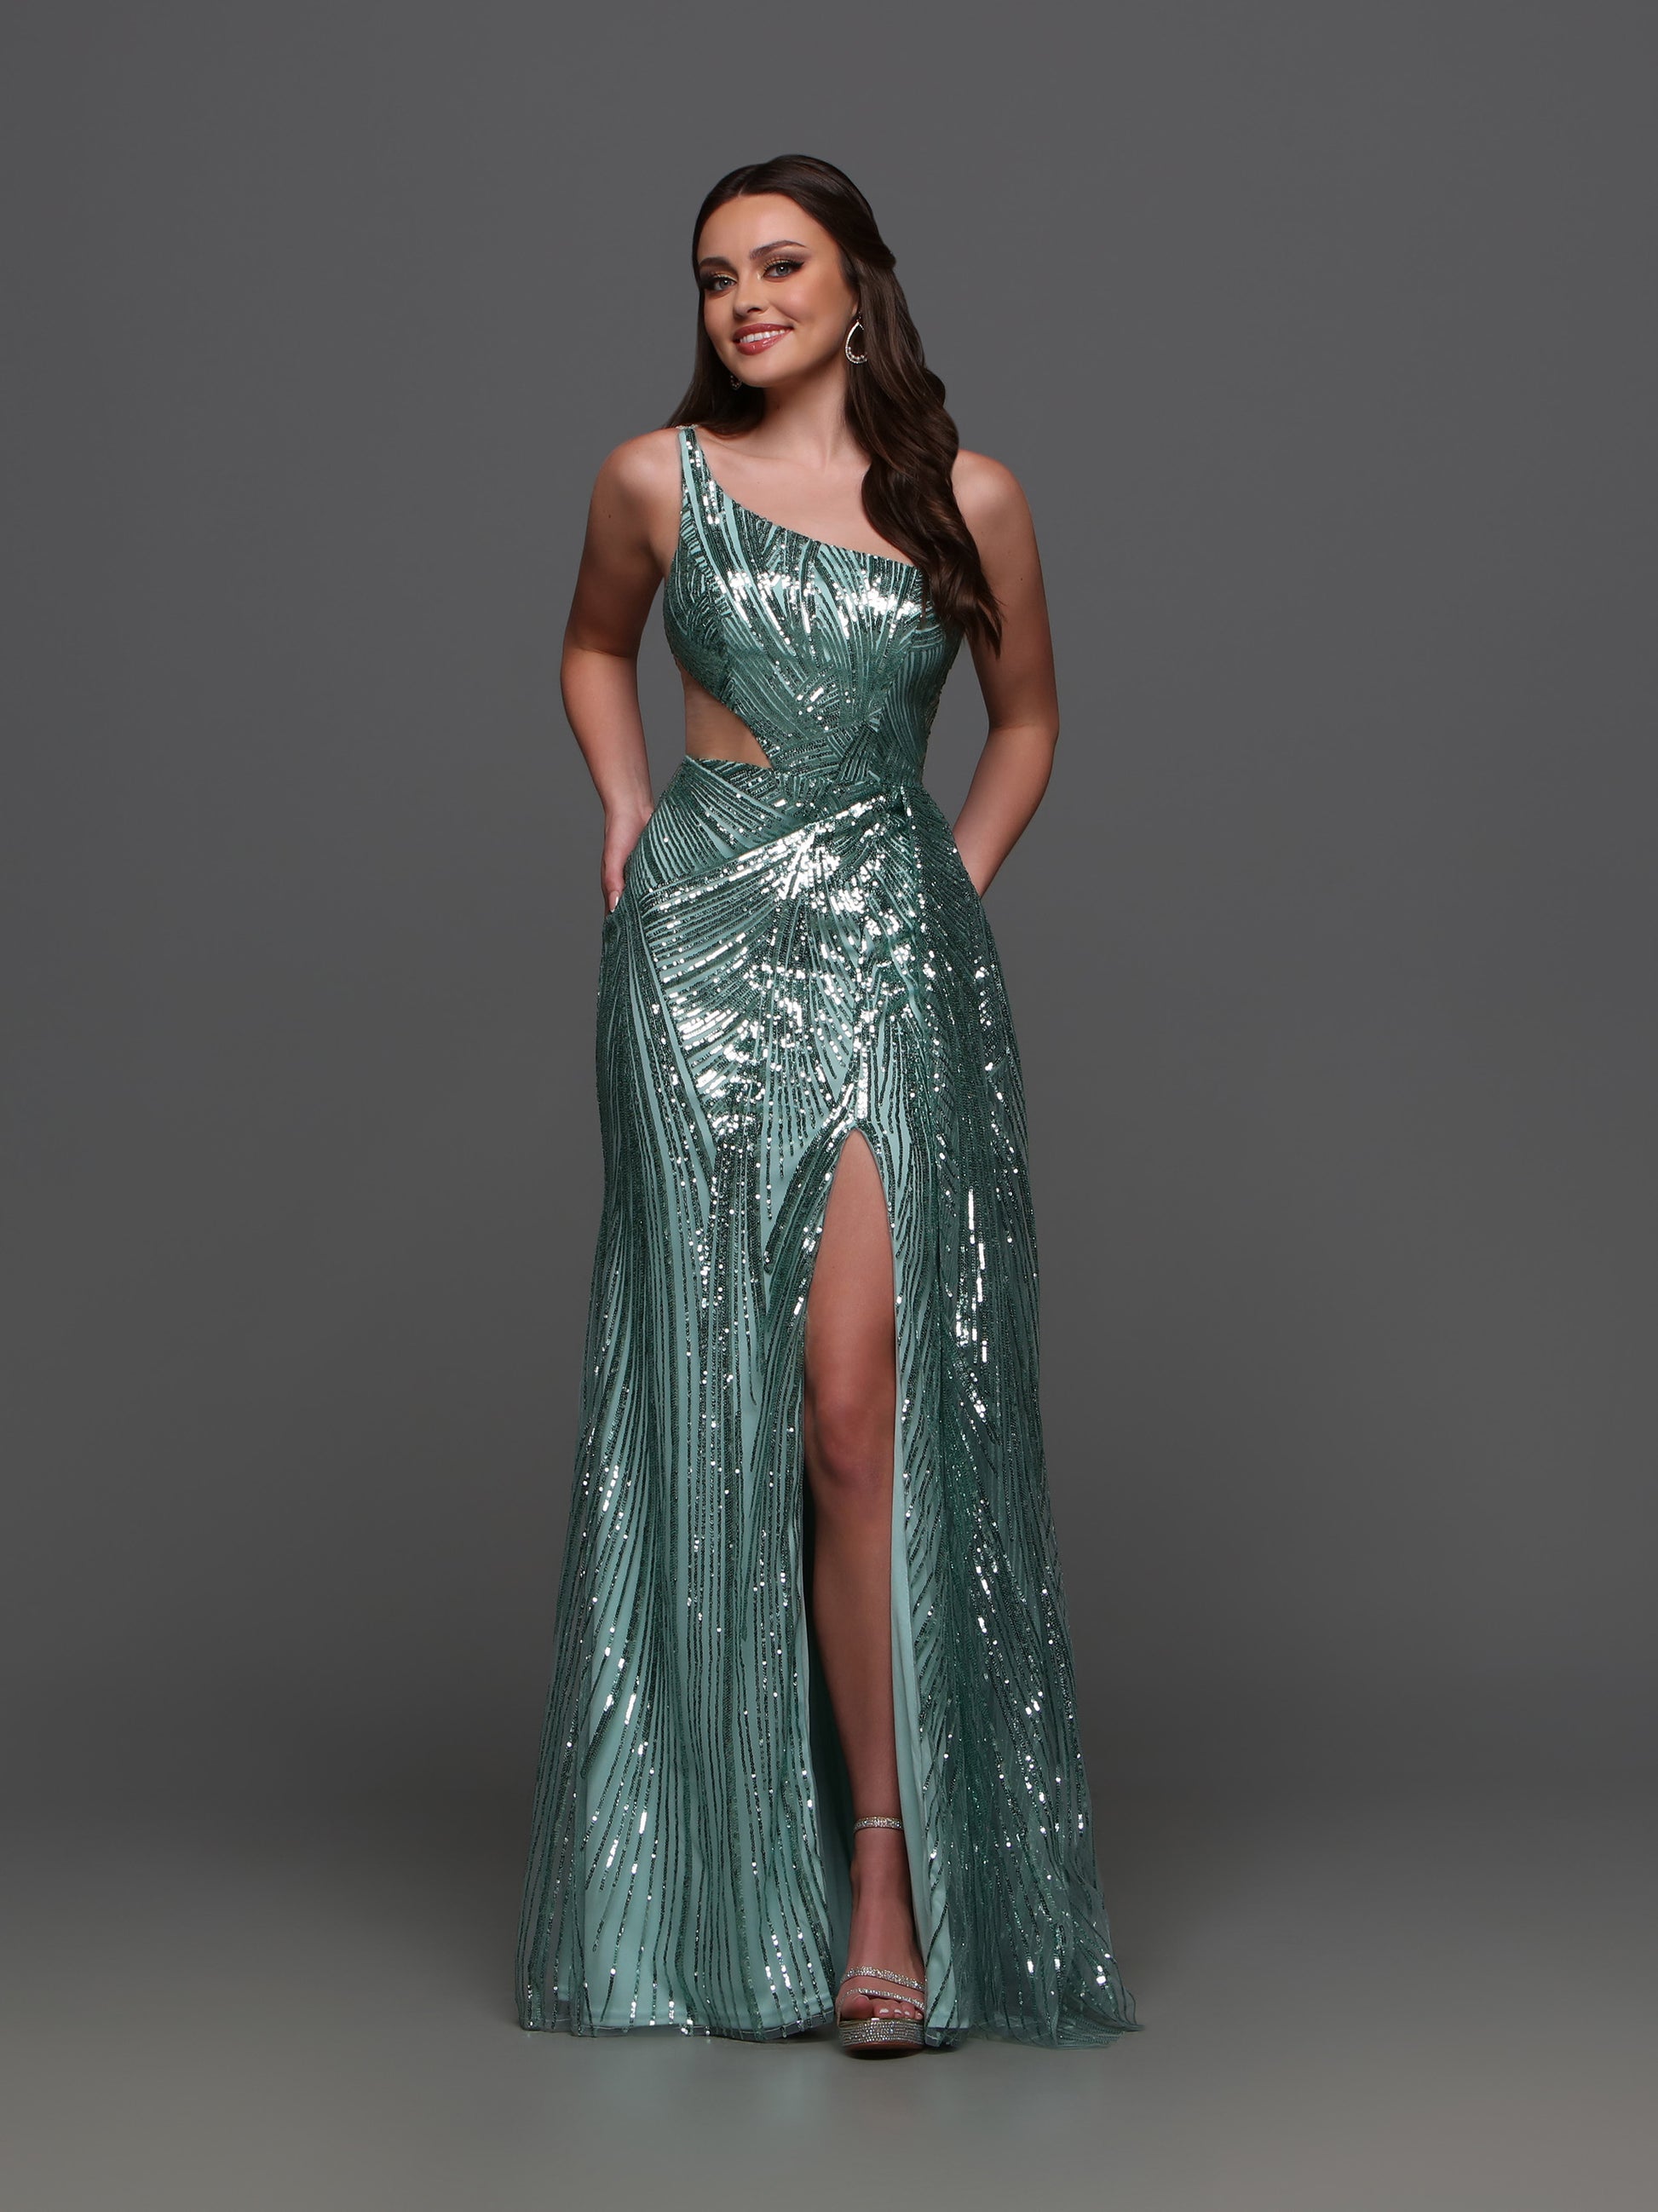 Elevate your formal look with the Candice Wang 72323 Sequin One Shoulder Cutout Dress. The sequin detailing adds a touch of glamour while the one shoulder and cutout design creates a sophisticated silhouette. The overskirt and maxi slit add a modern twist to this classic gown.  Sizes: 0-16  Colors: Sage